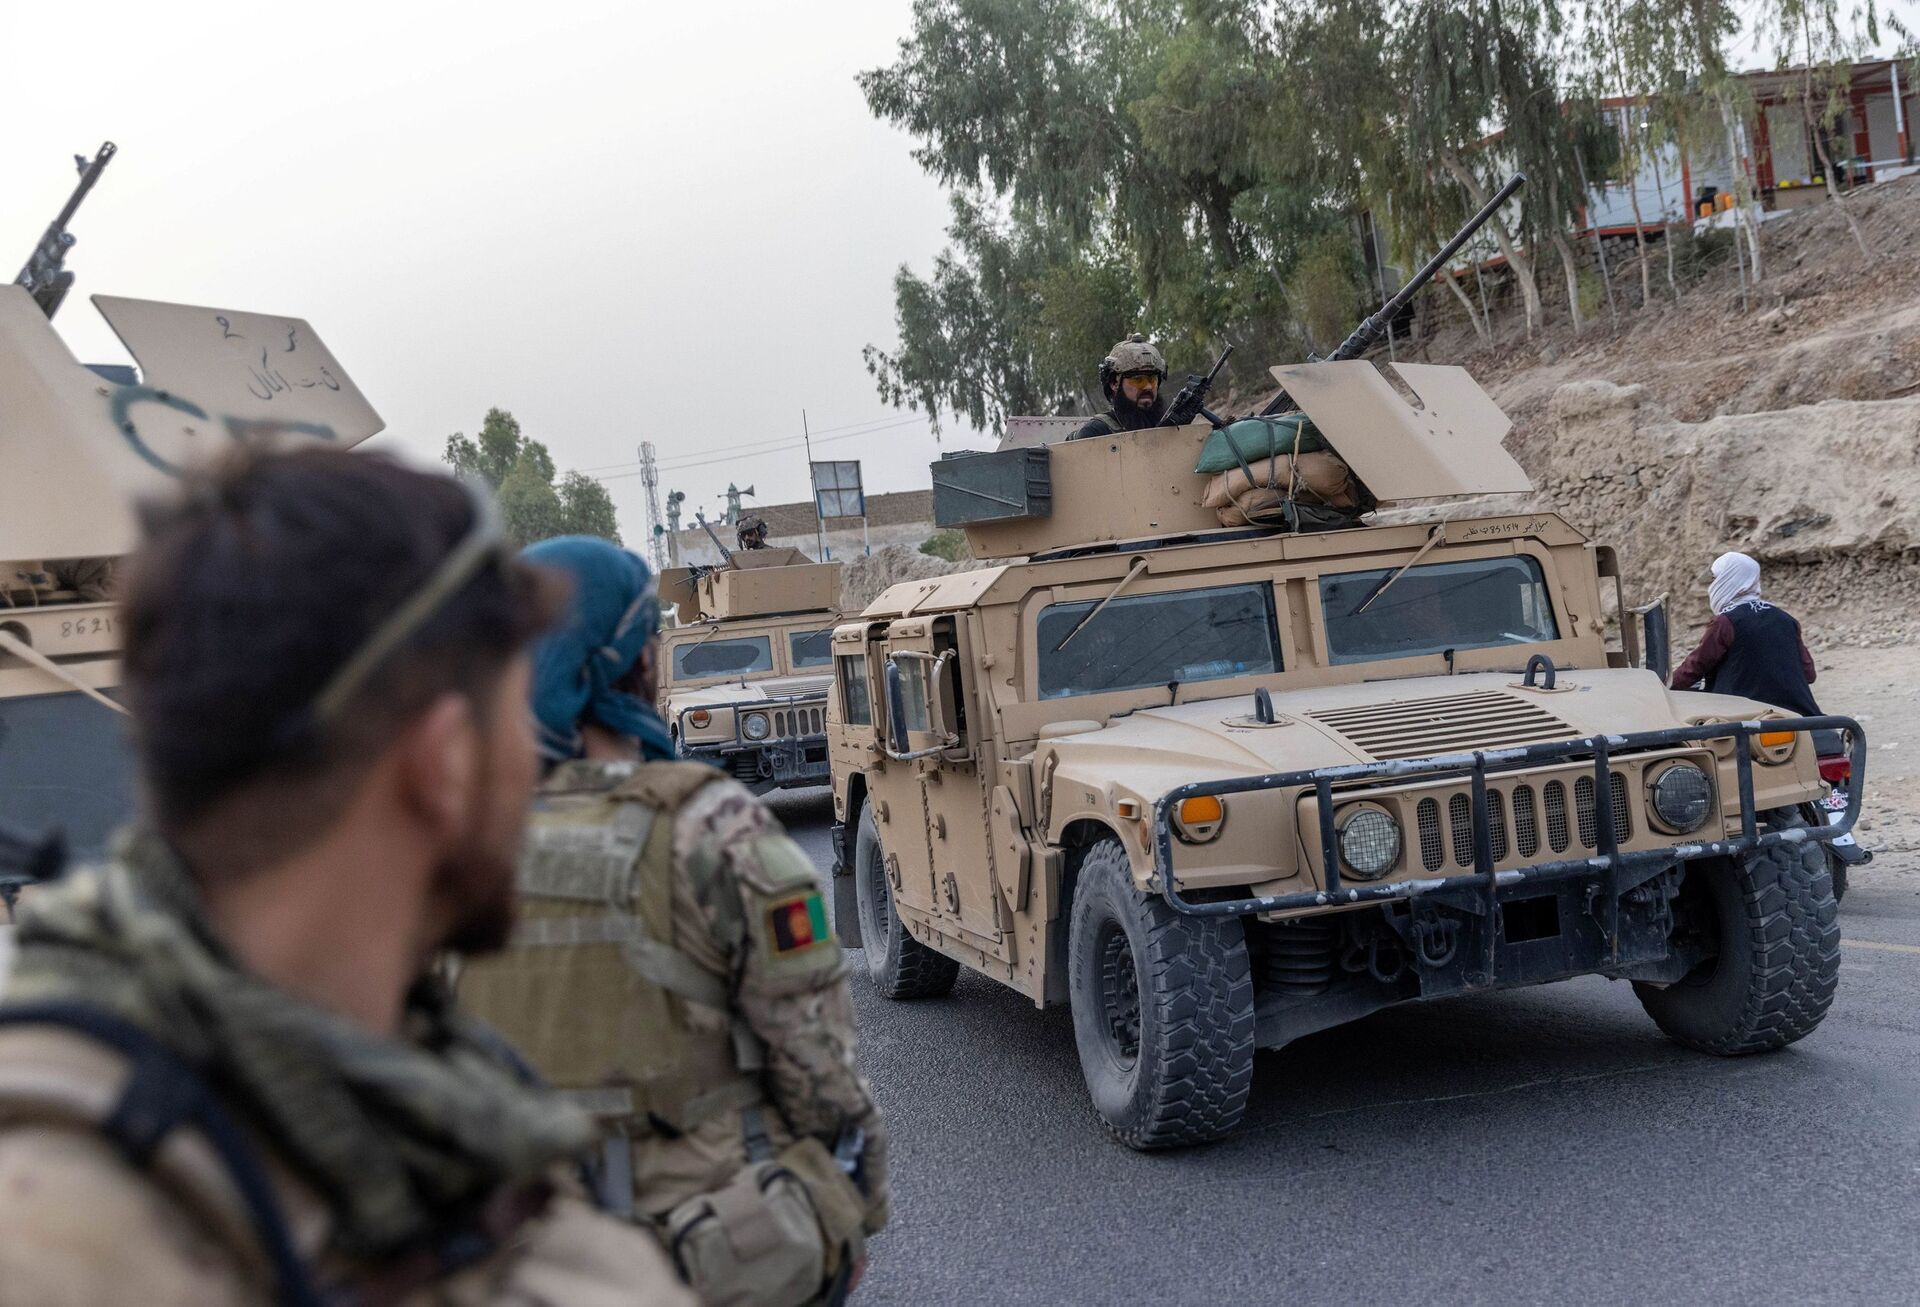 A convoy of Afghan Special Forces is seen during the rescue mission of a police officer besieged at a check post surrounded by Taliban, in Kandahar province, Afghanistan, July 13, 2021. REUTERS/Danish Siddiqui - Sputnik International, 1920, 07.09.2021